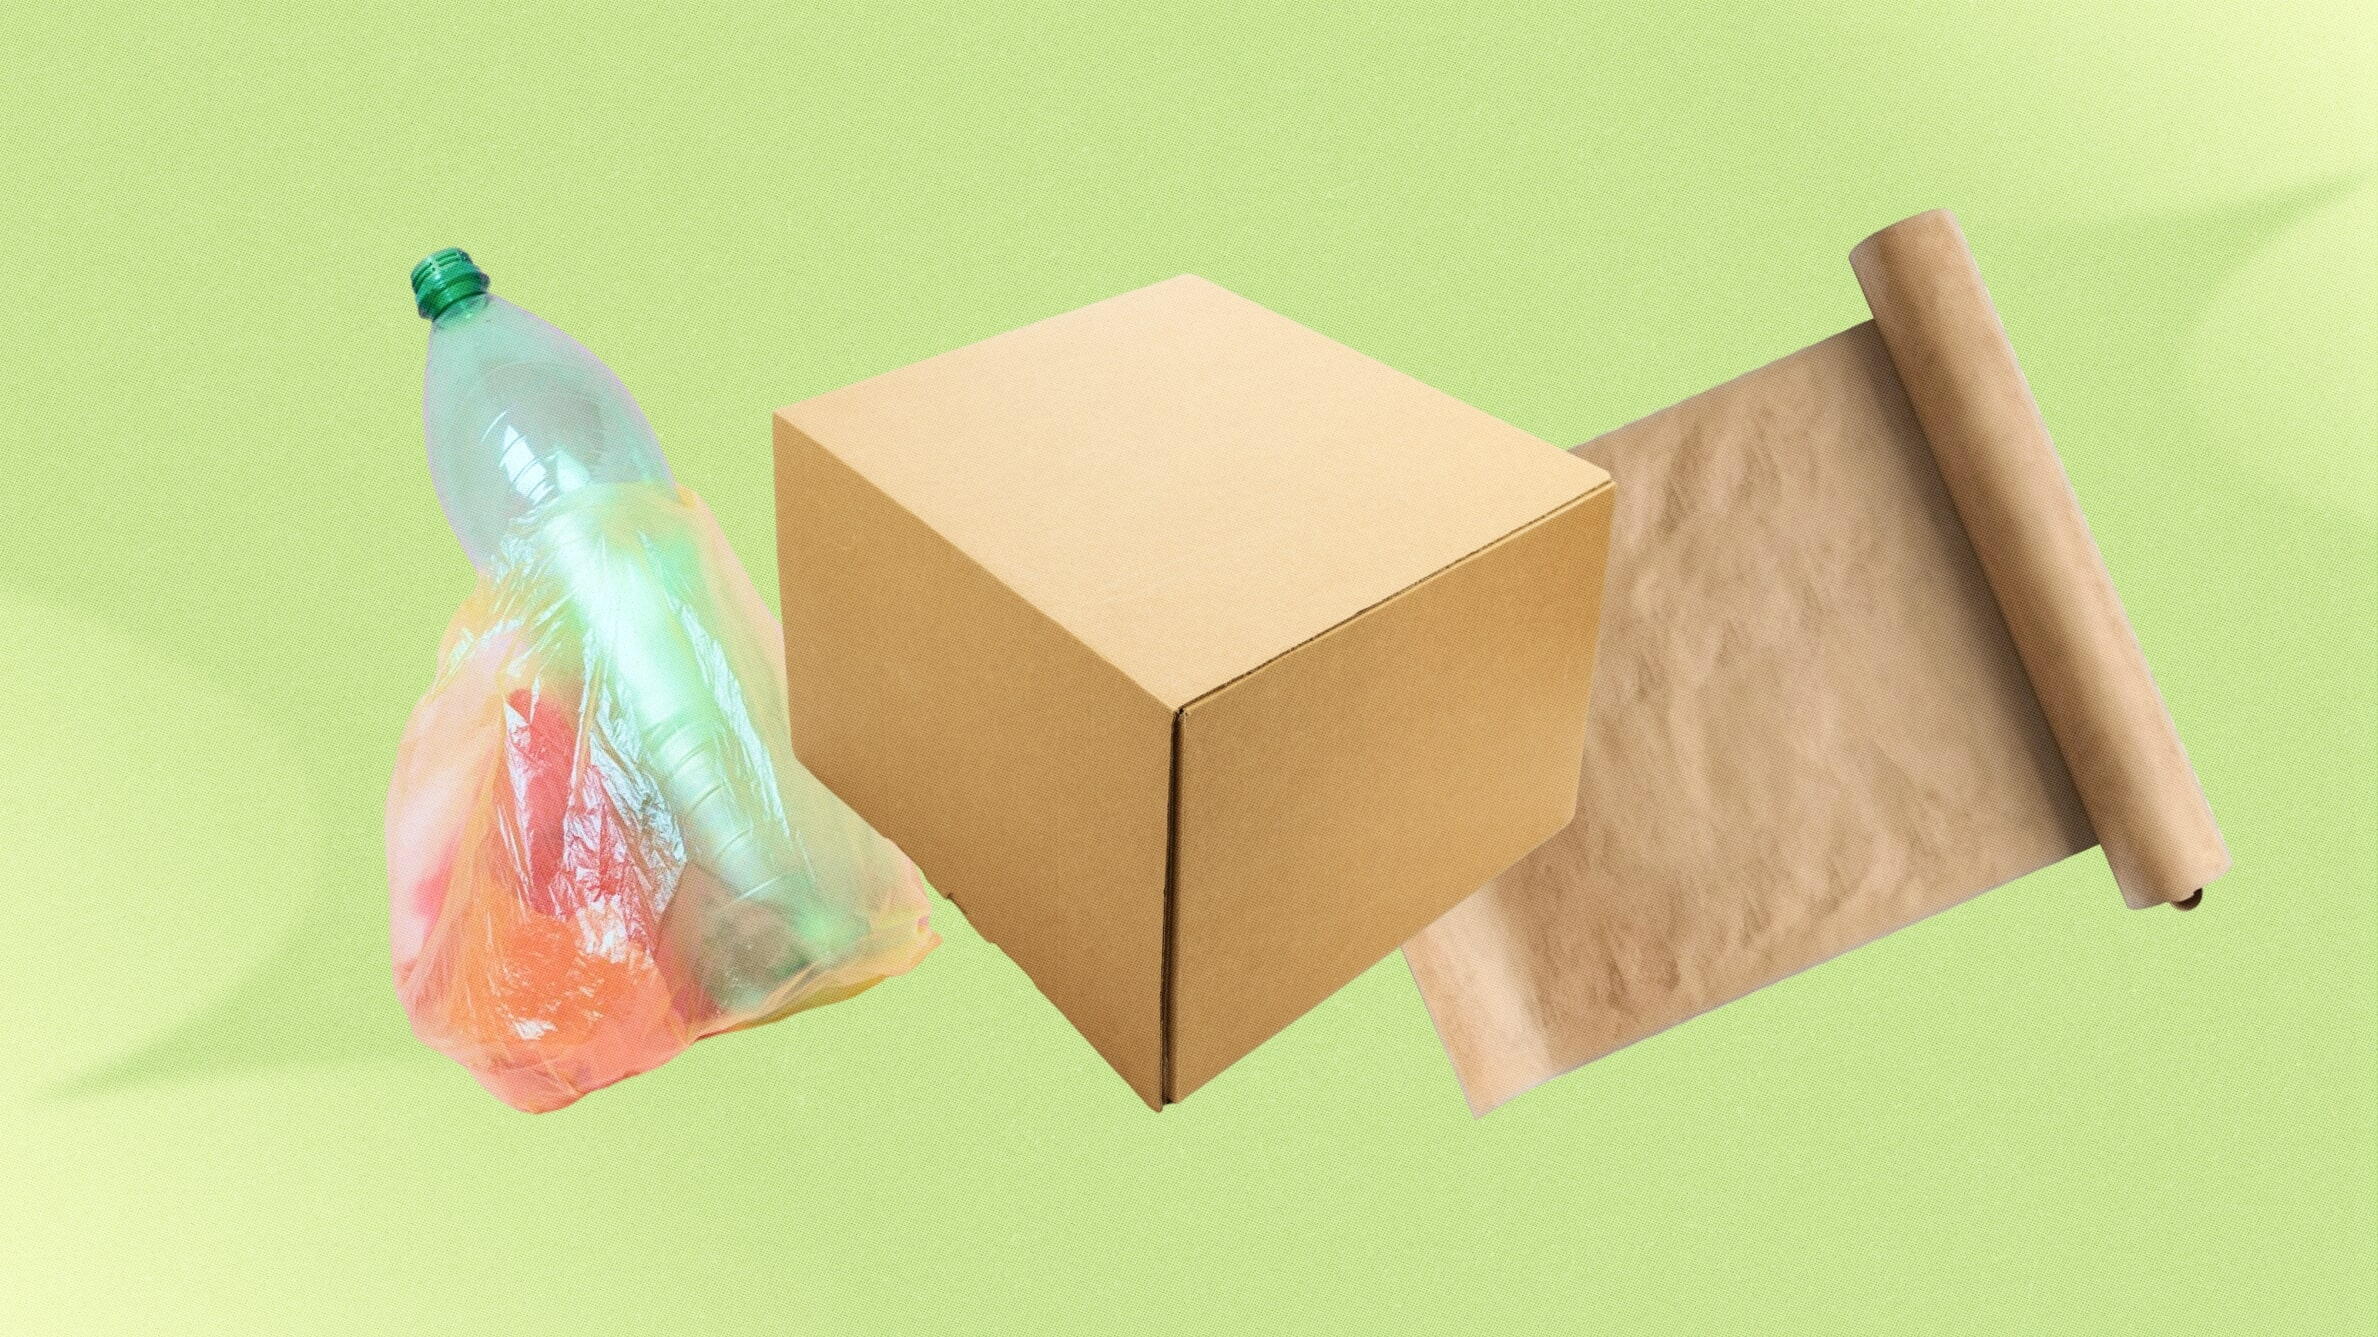 Types of packaging and their environmental impact